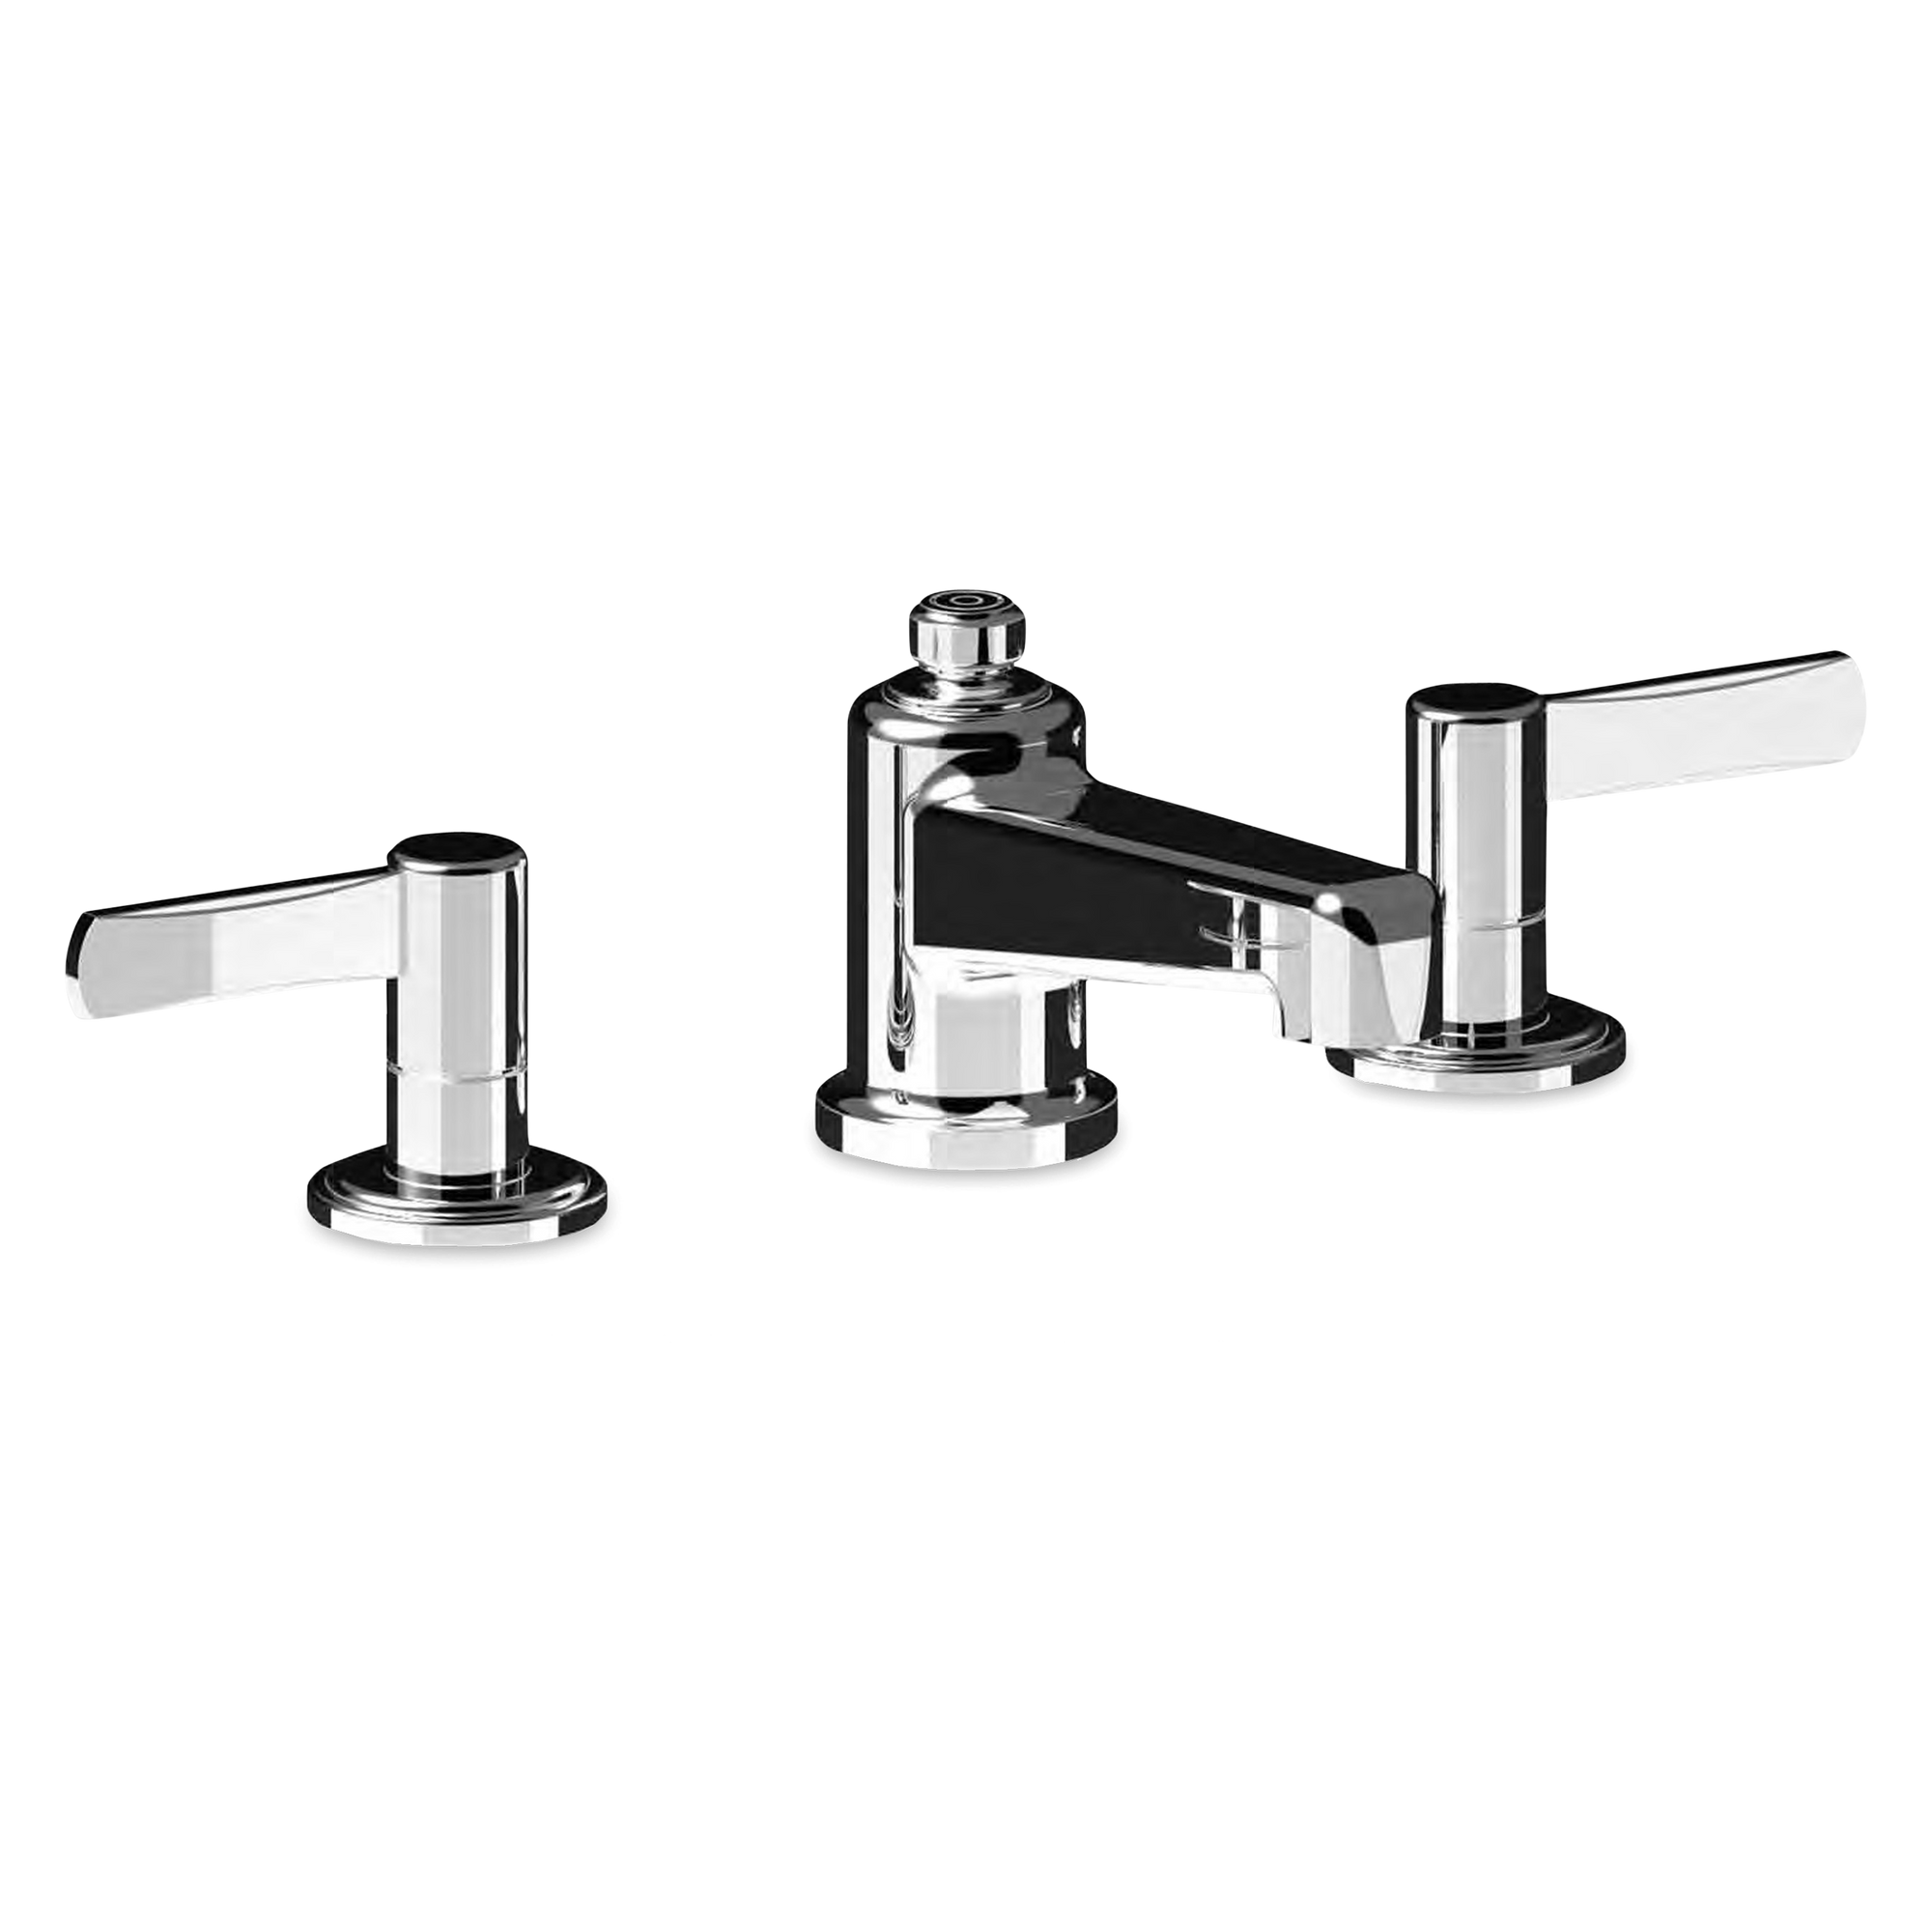 The Harrow widespread basin faucet with two lever handles has an industrial feel and modern esthetic inspired by the streamlined look of Art Deco.